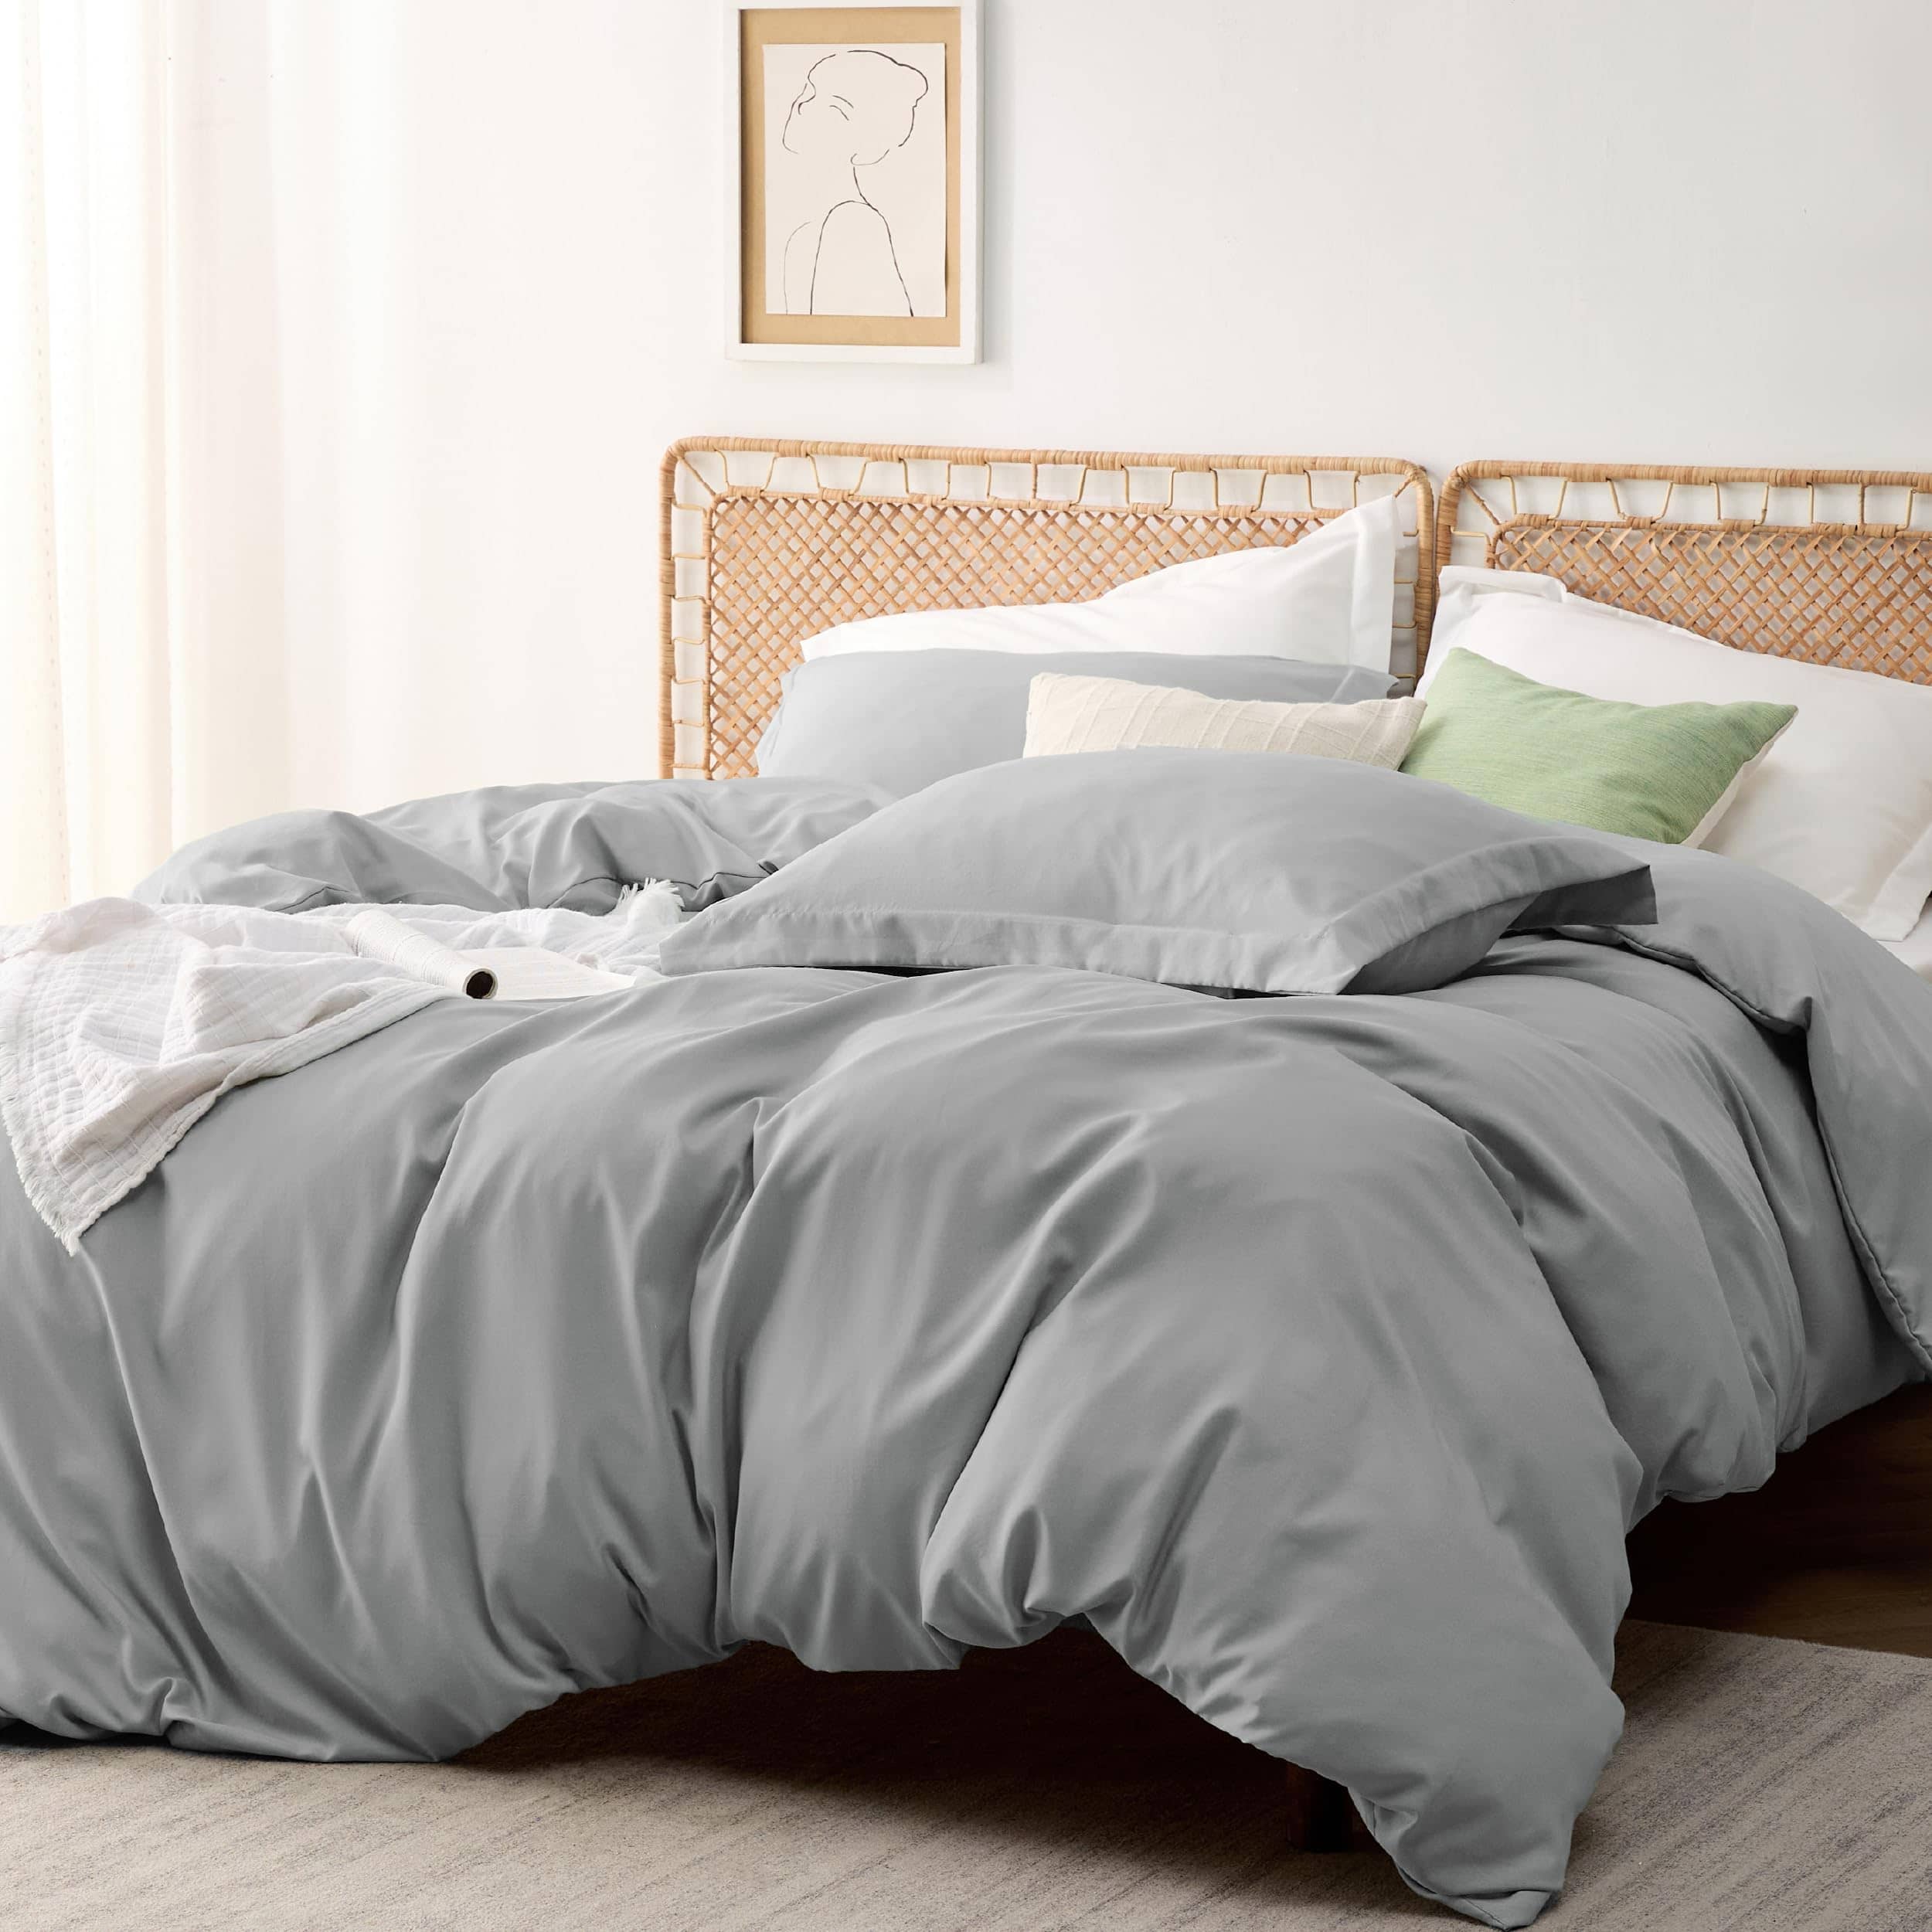 Polyester and Rayon Derived from Bamboo Blend Duvet Cover Set